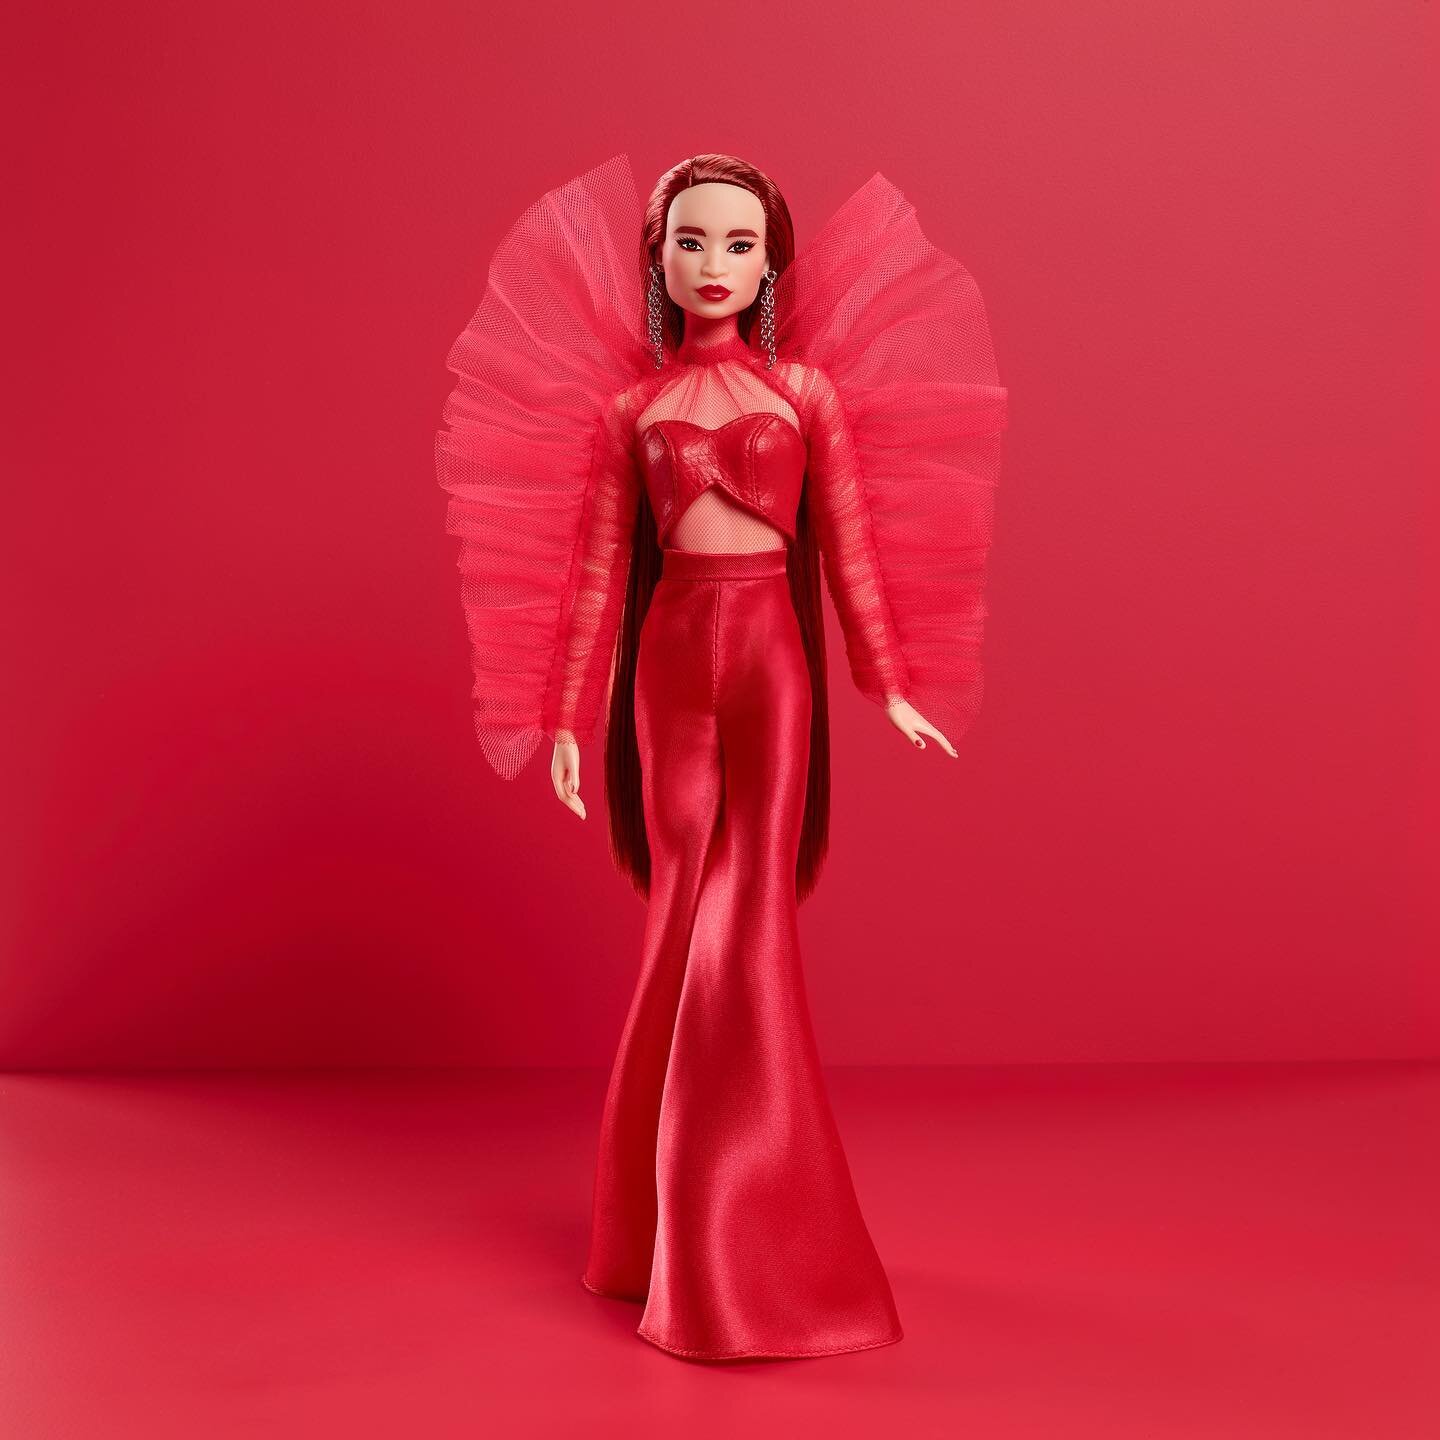 Barbie Collector Mattel 75th Anniversary Doll (12-in Blonde) in Red Gown -  Walmart.com